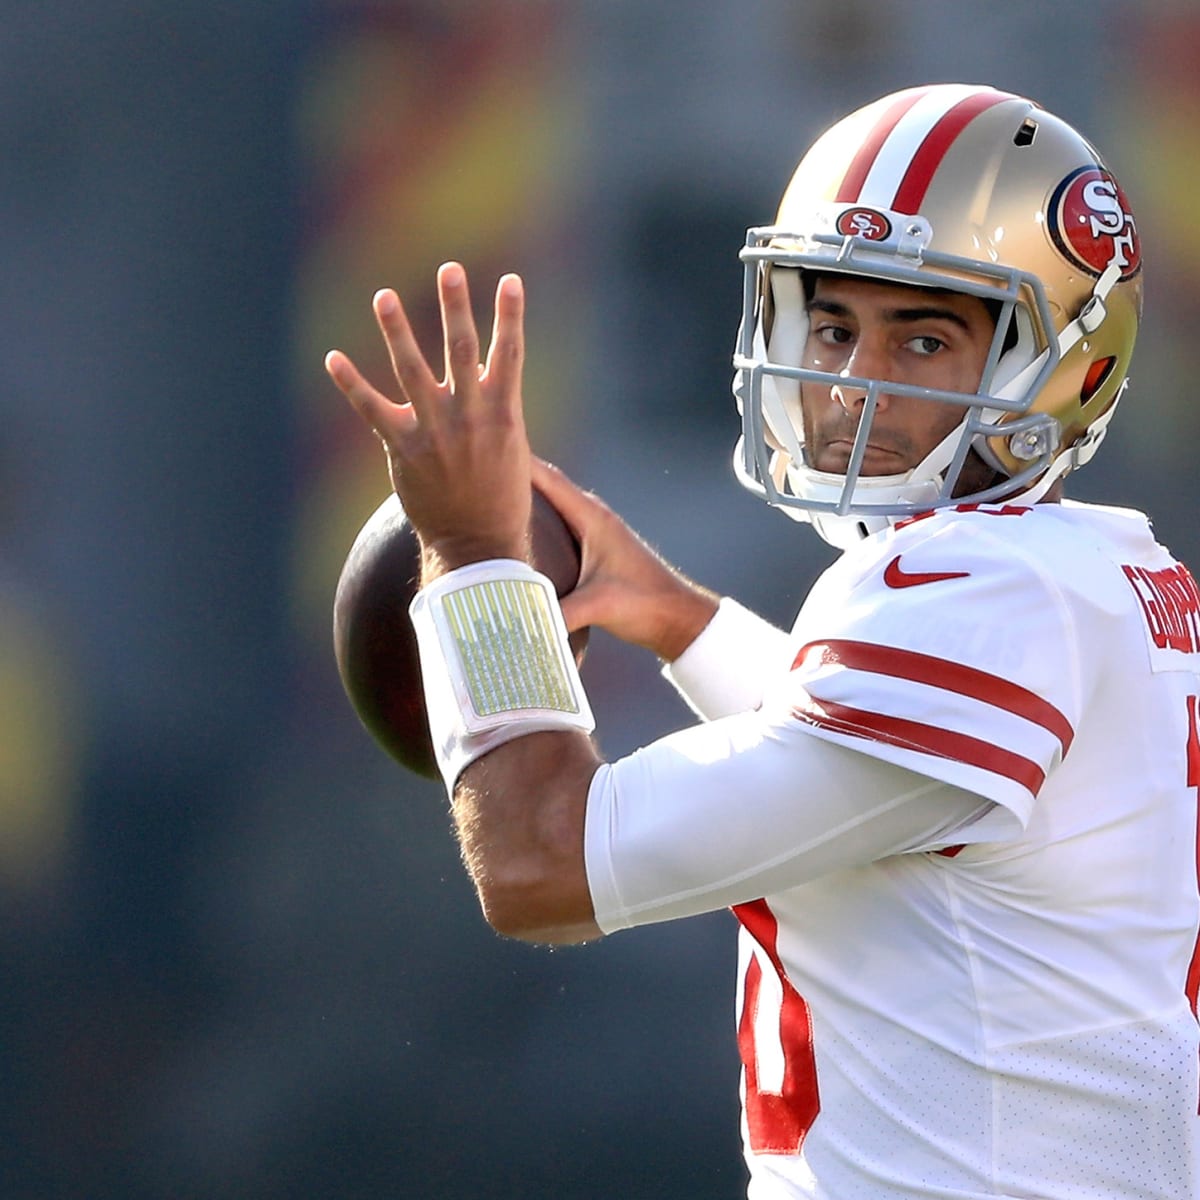 Jimmy Garoppolo Named NFC Offensive Player of the Week